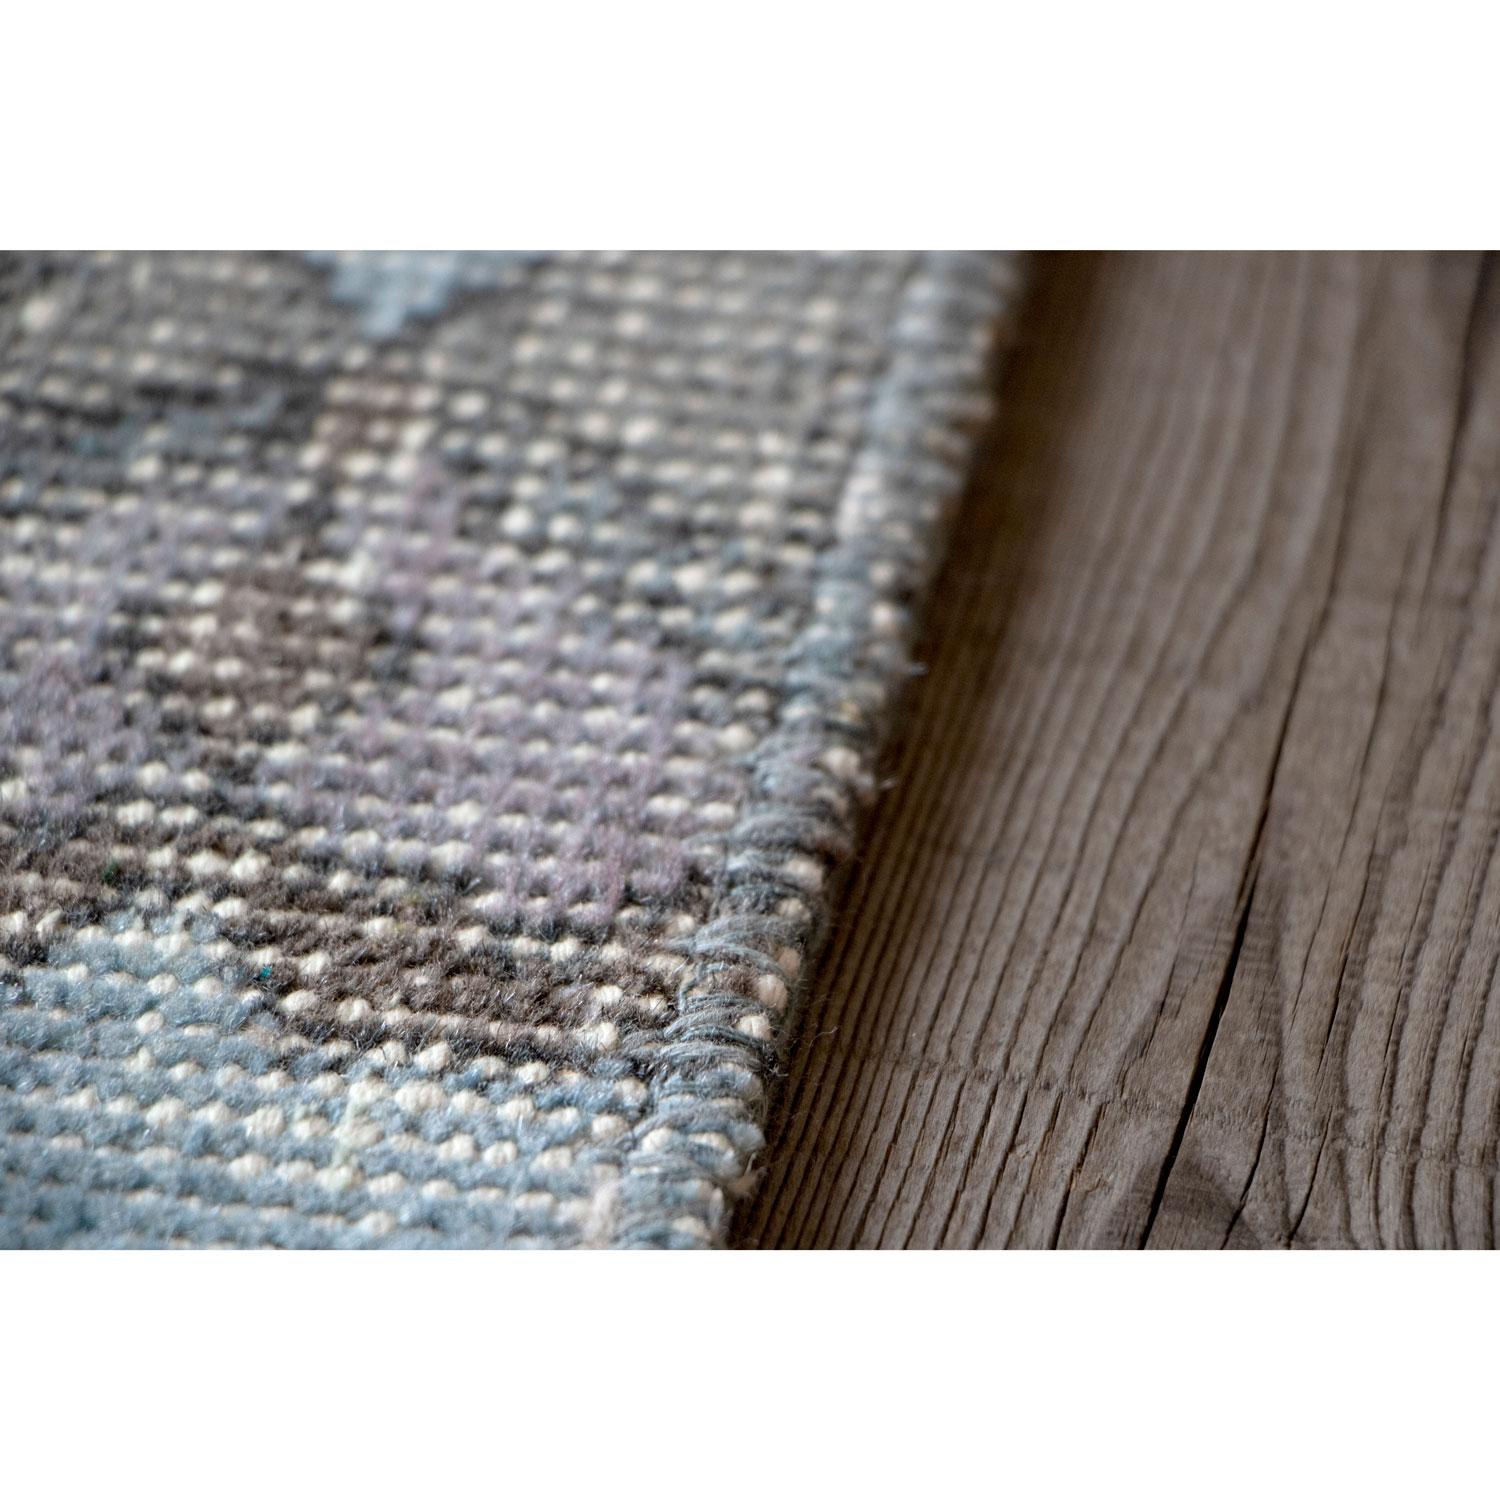 Antique Chic Vintage Blue Brown Wool Cotton Rug by Deanna Comellini 250x350 cm For Sale 4